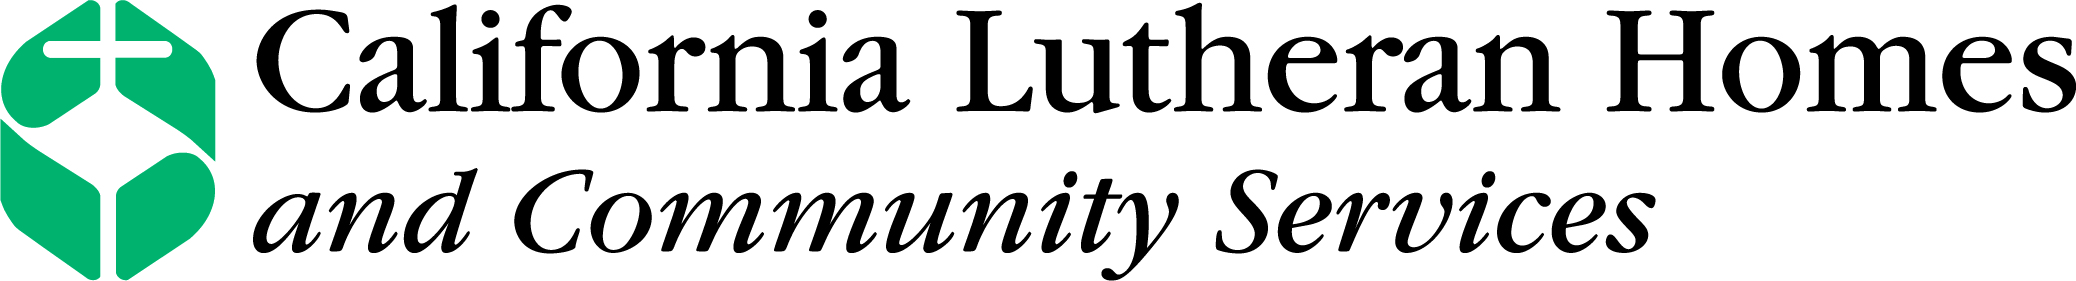 California Lutheran Homes <i>and Community Services</i>